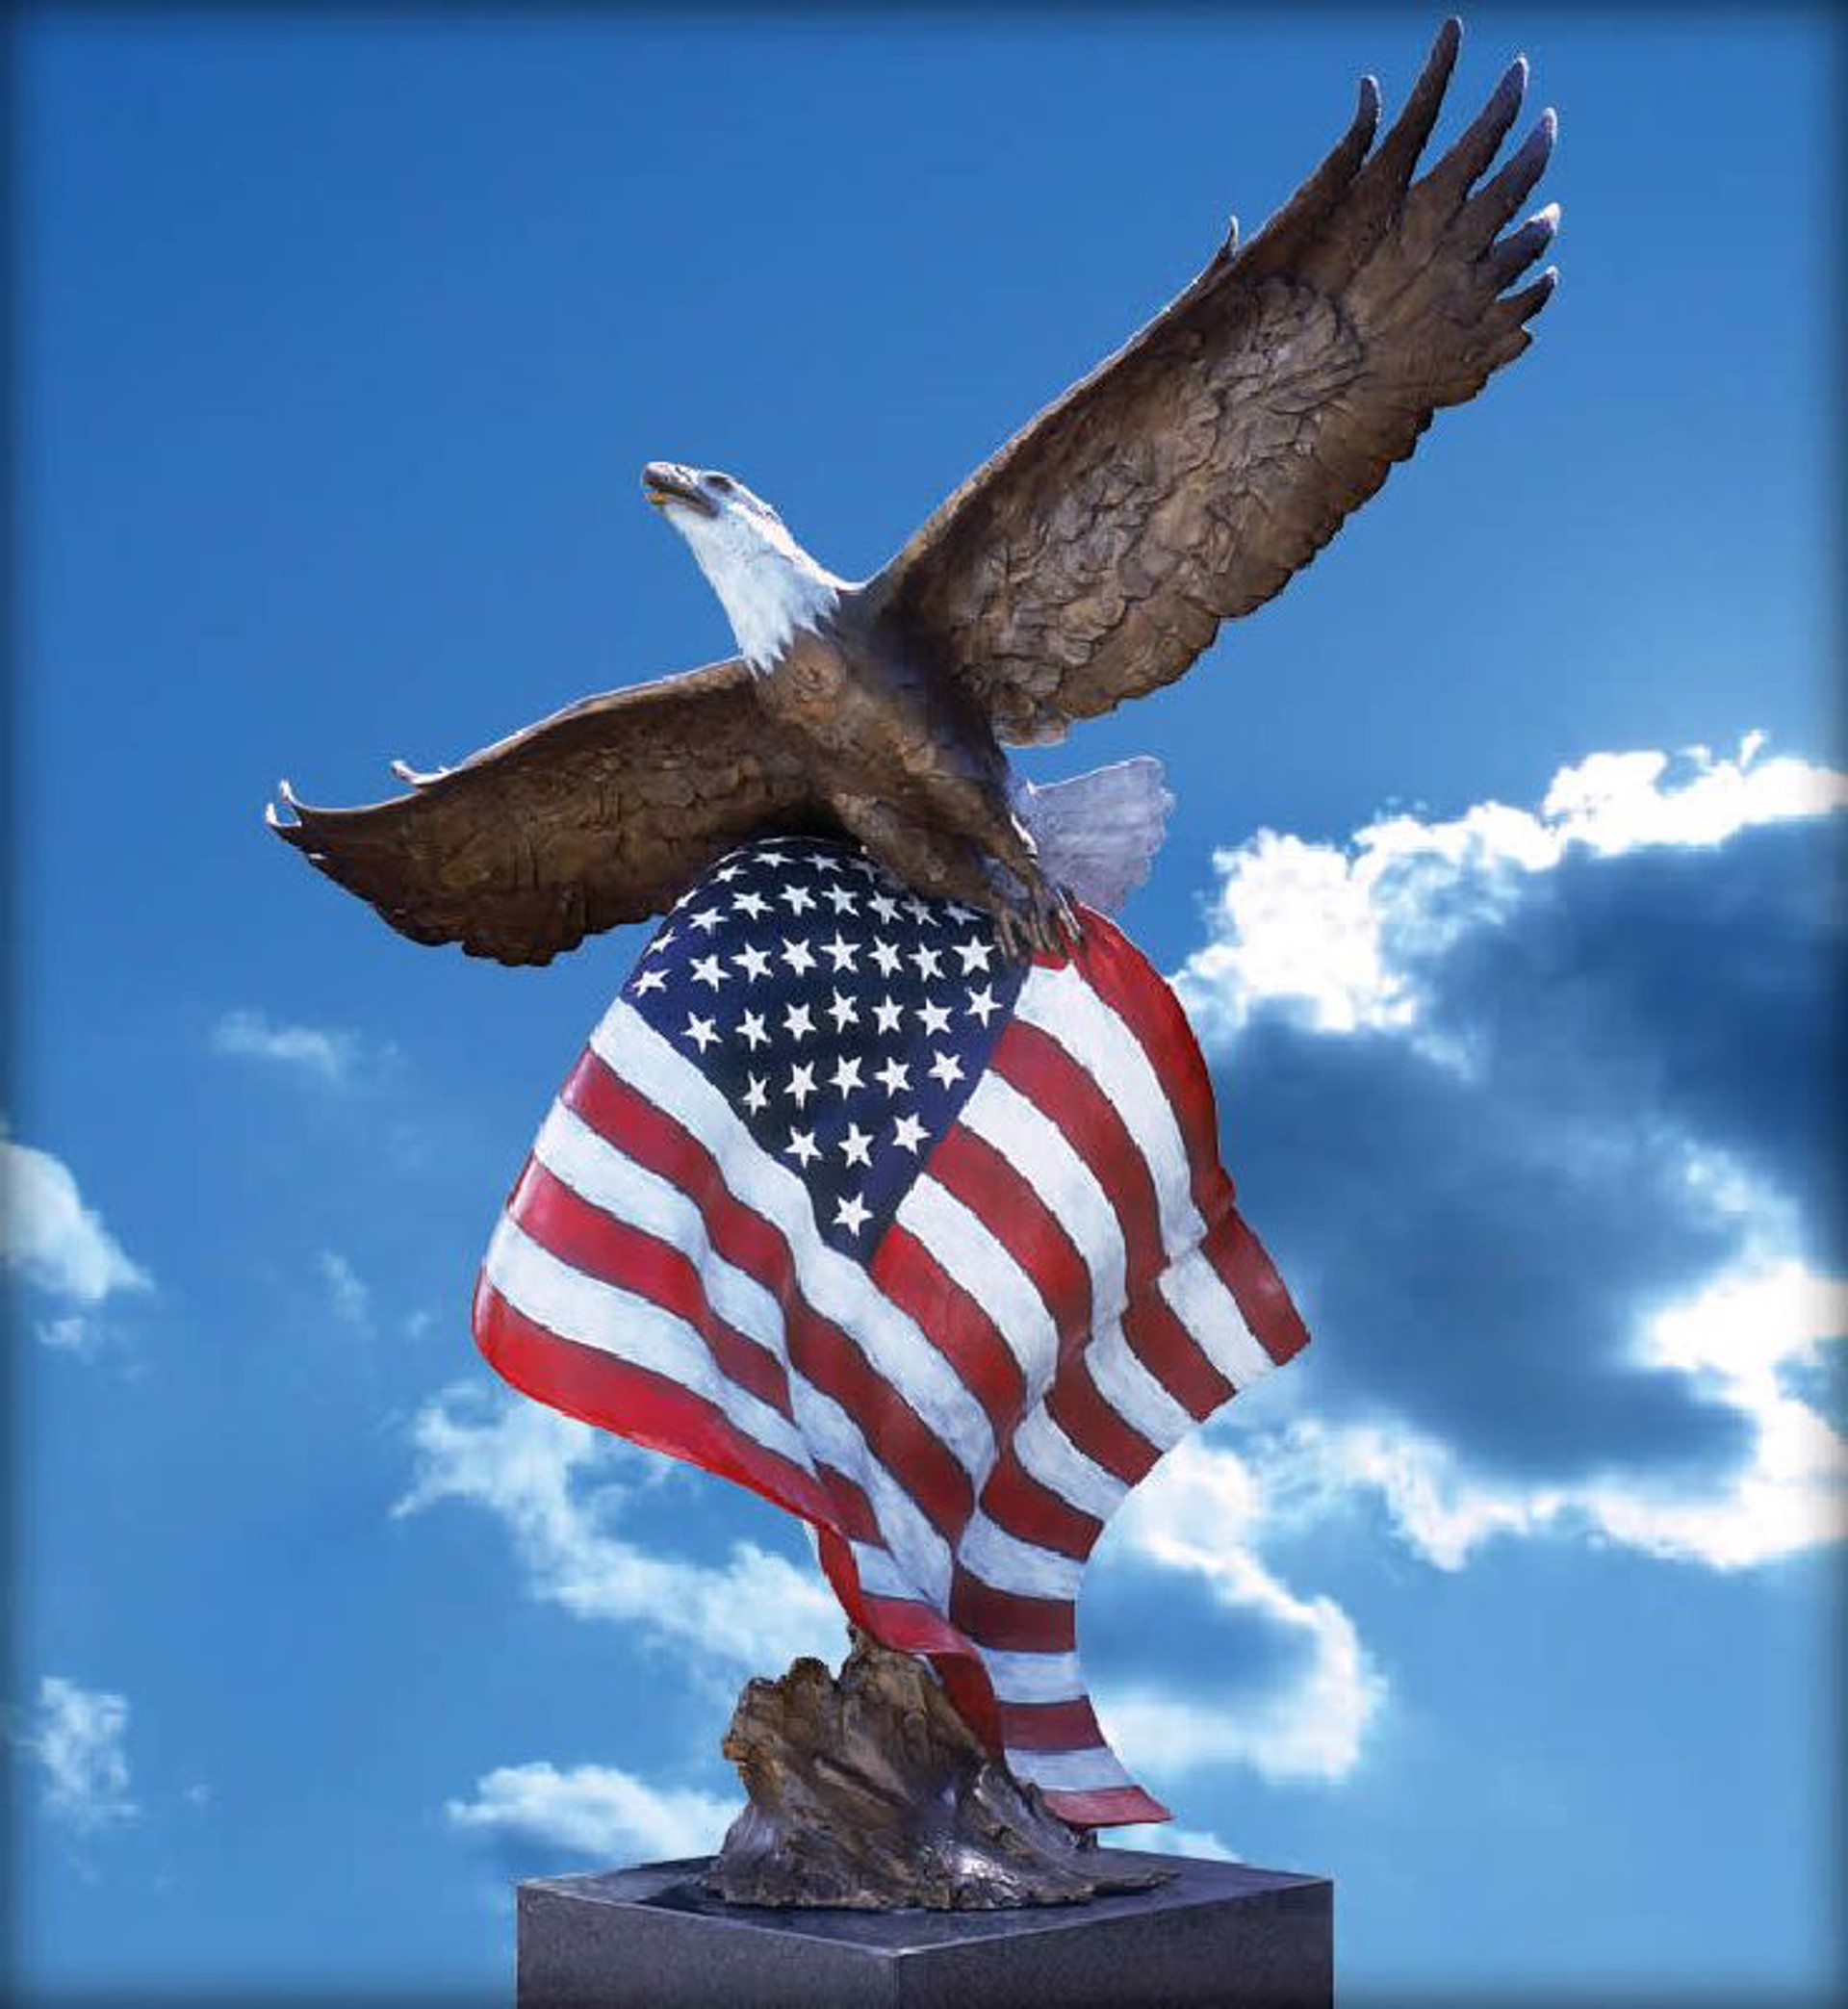 On the Wings of Freedom by Gary Lee Price (sculptor)